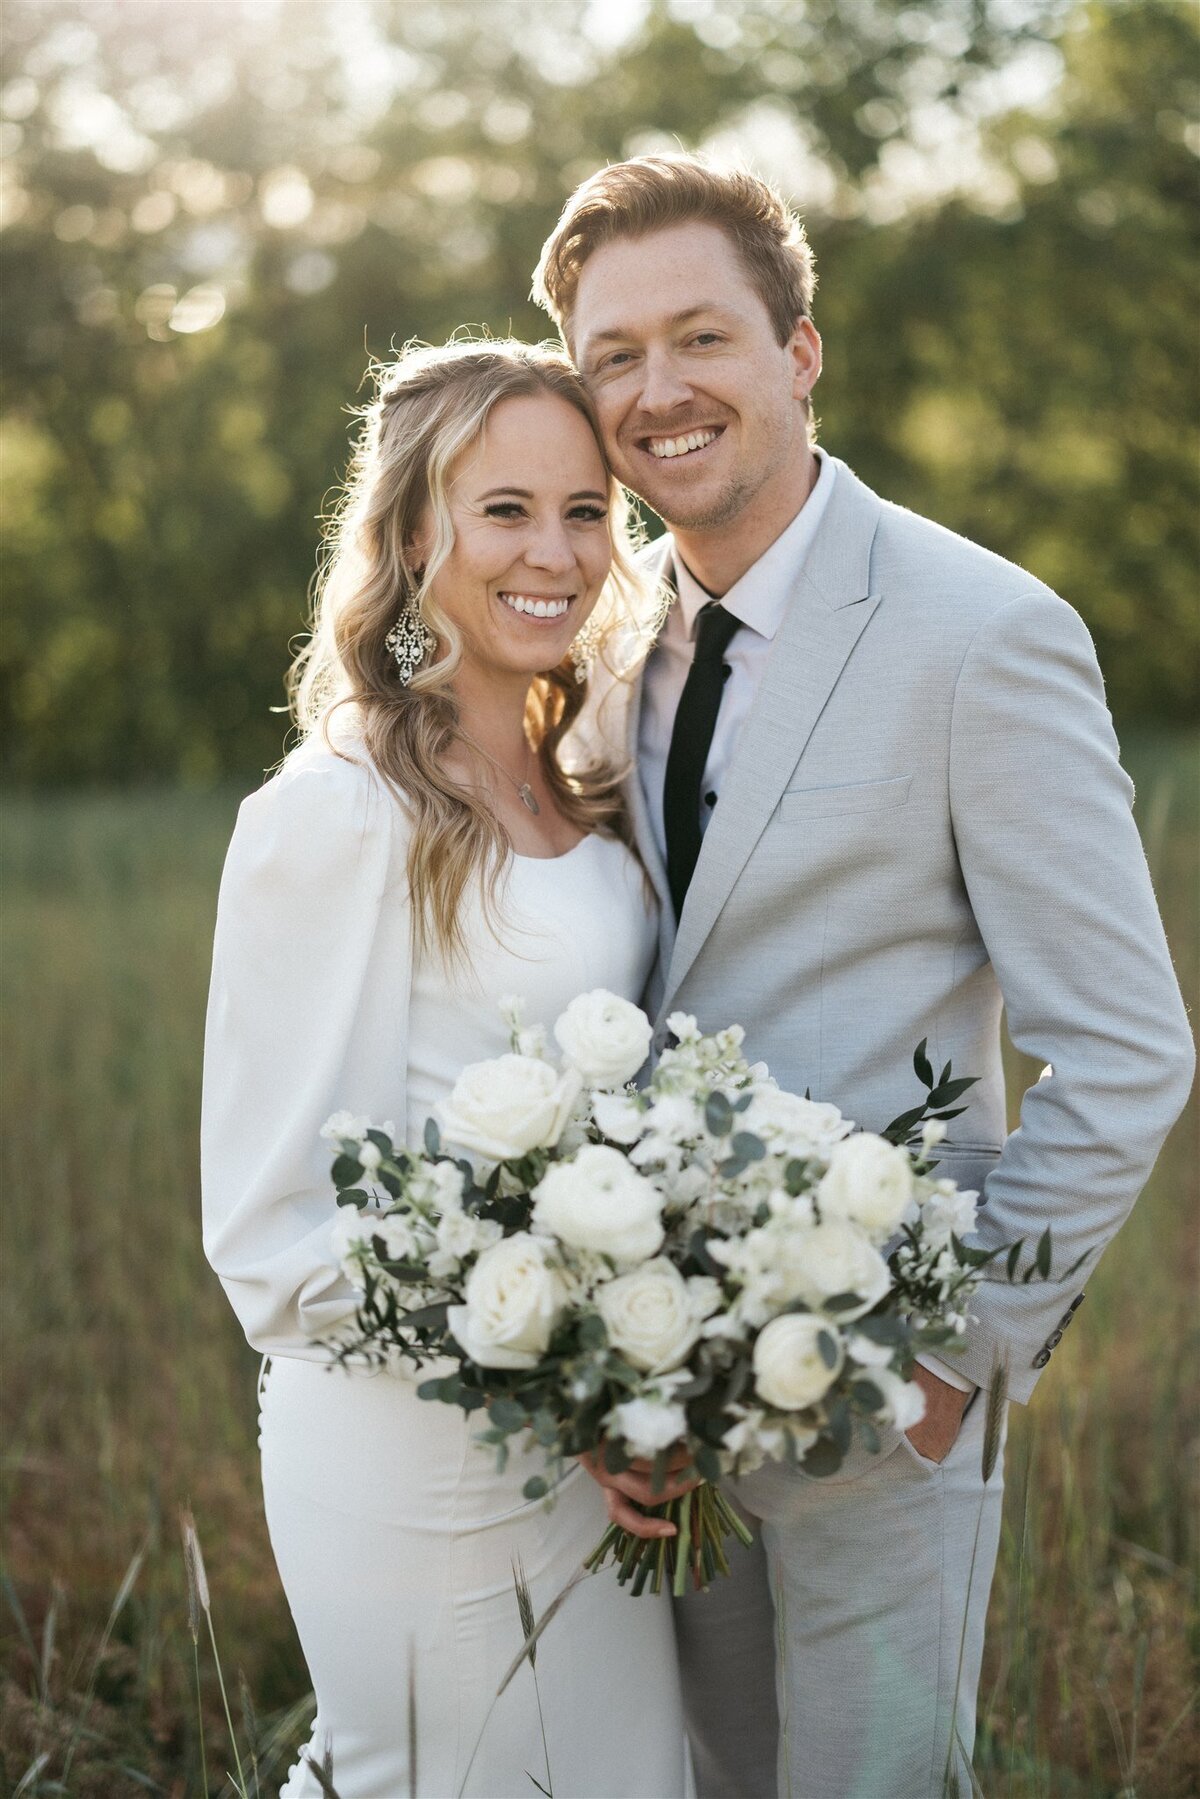 Utah bride and groom with white dress, gray suit, and white bouquet.